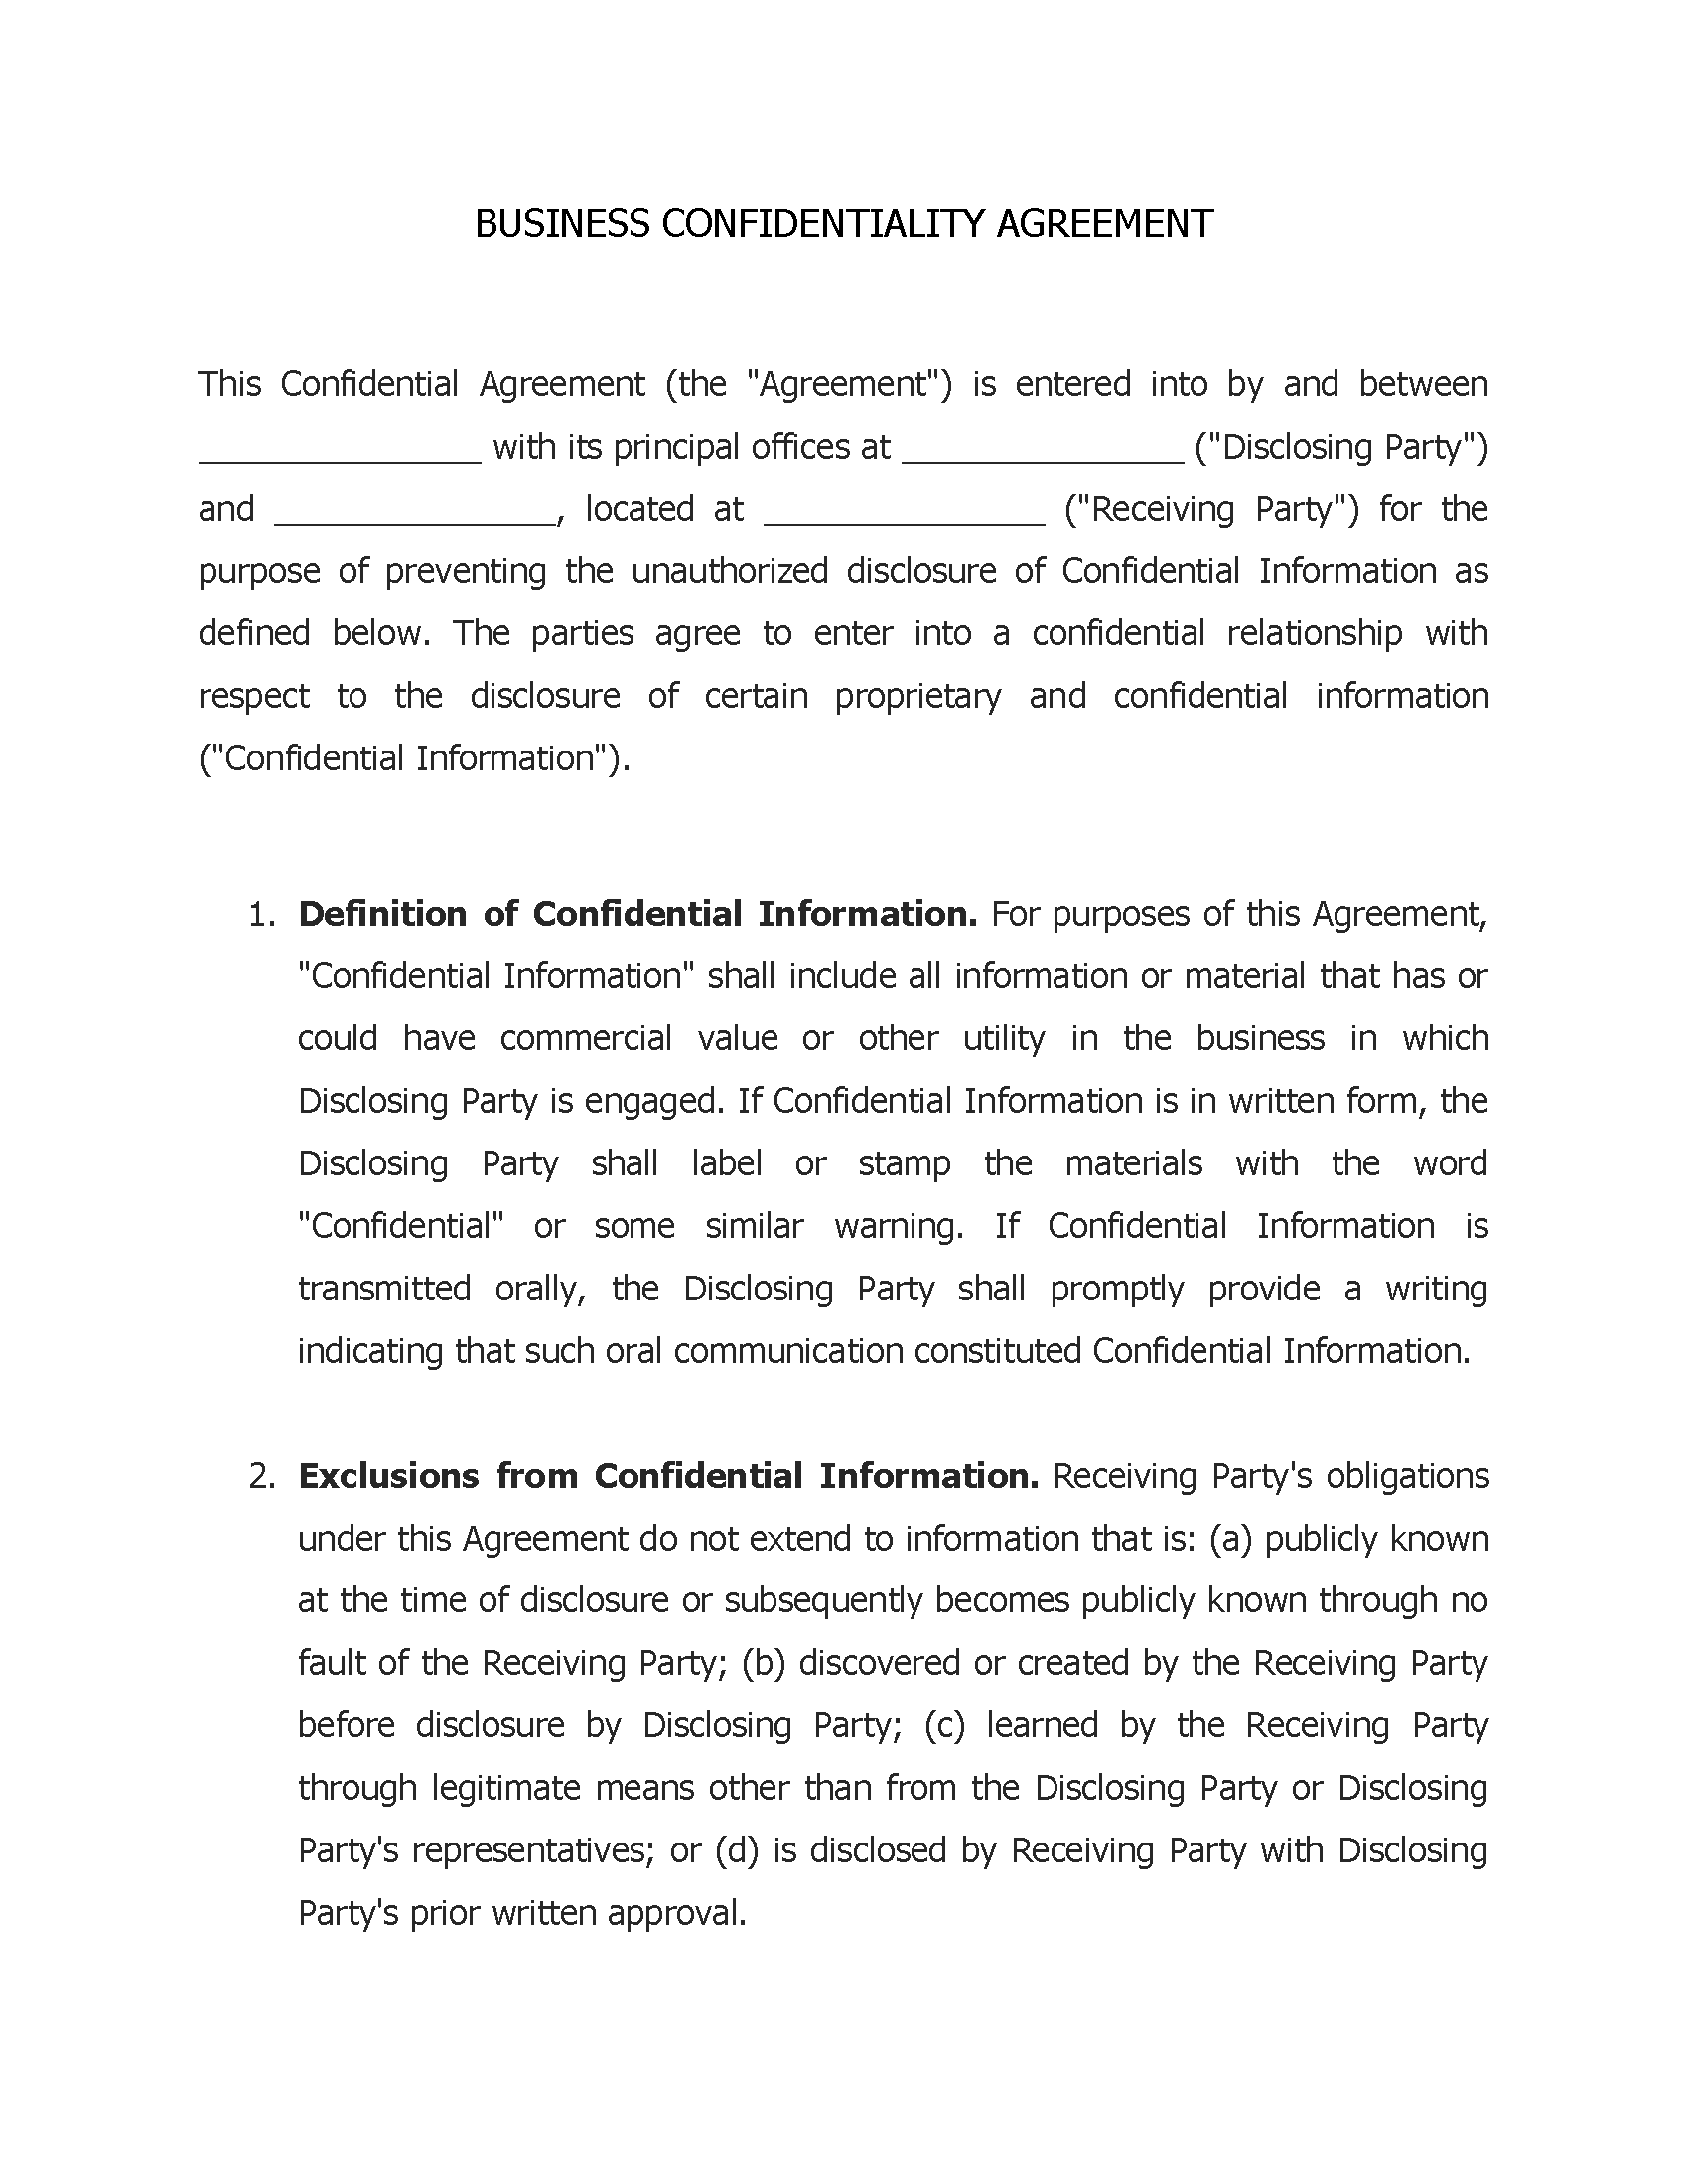 Business Confidentiality Agreement